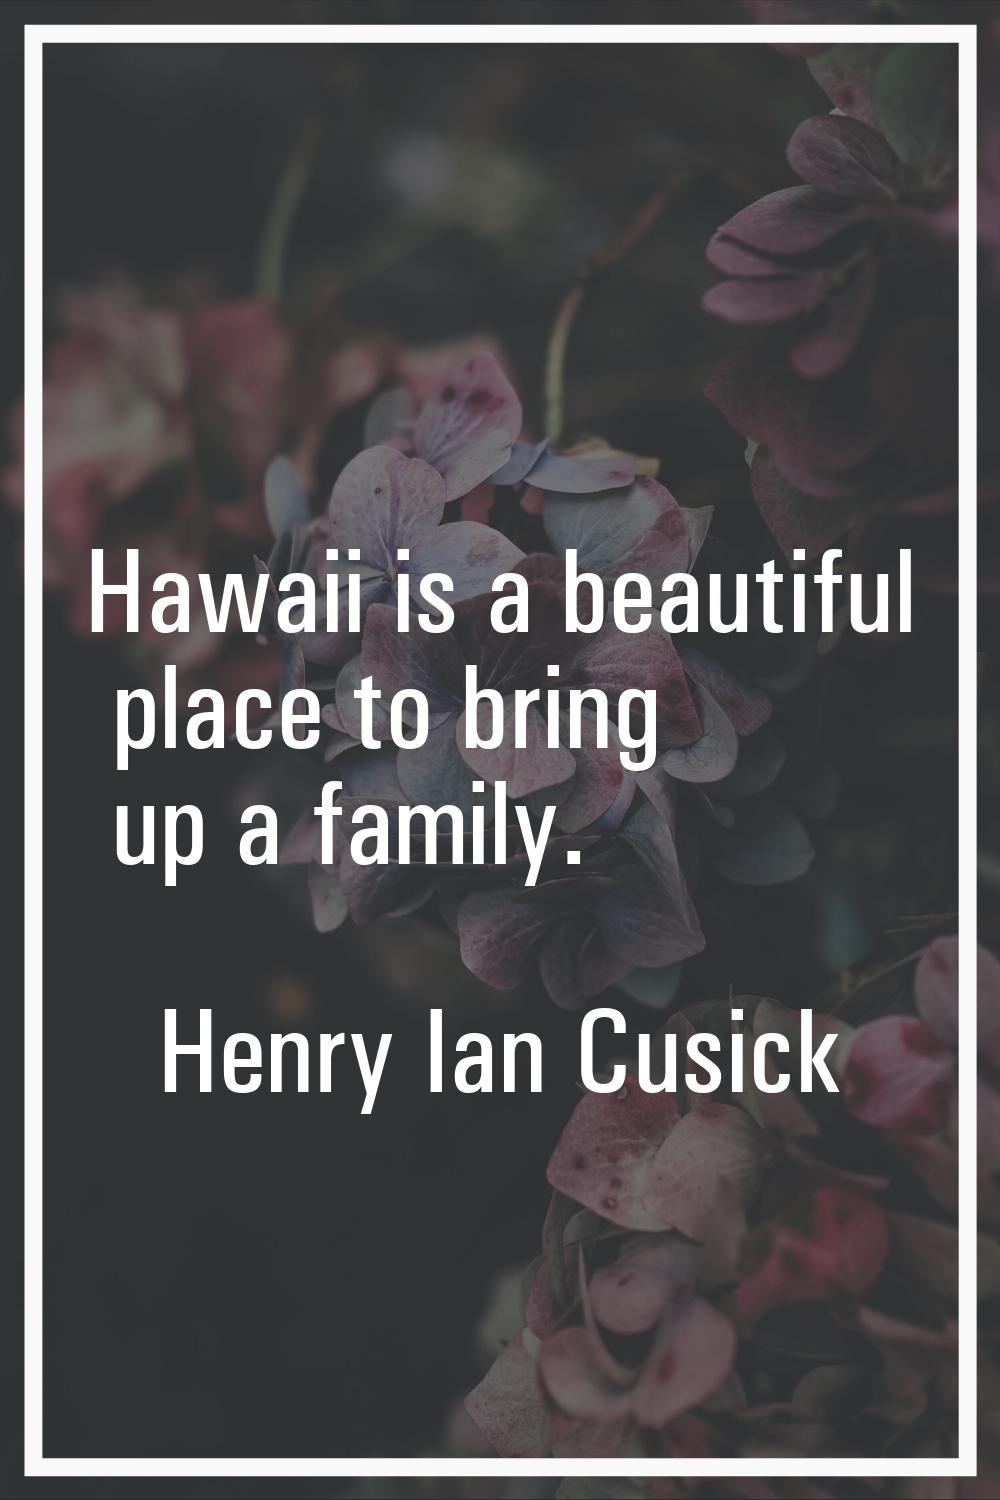 Hawaii is a beautiful place to bring up a family.